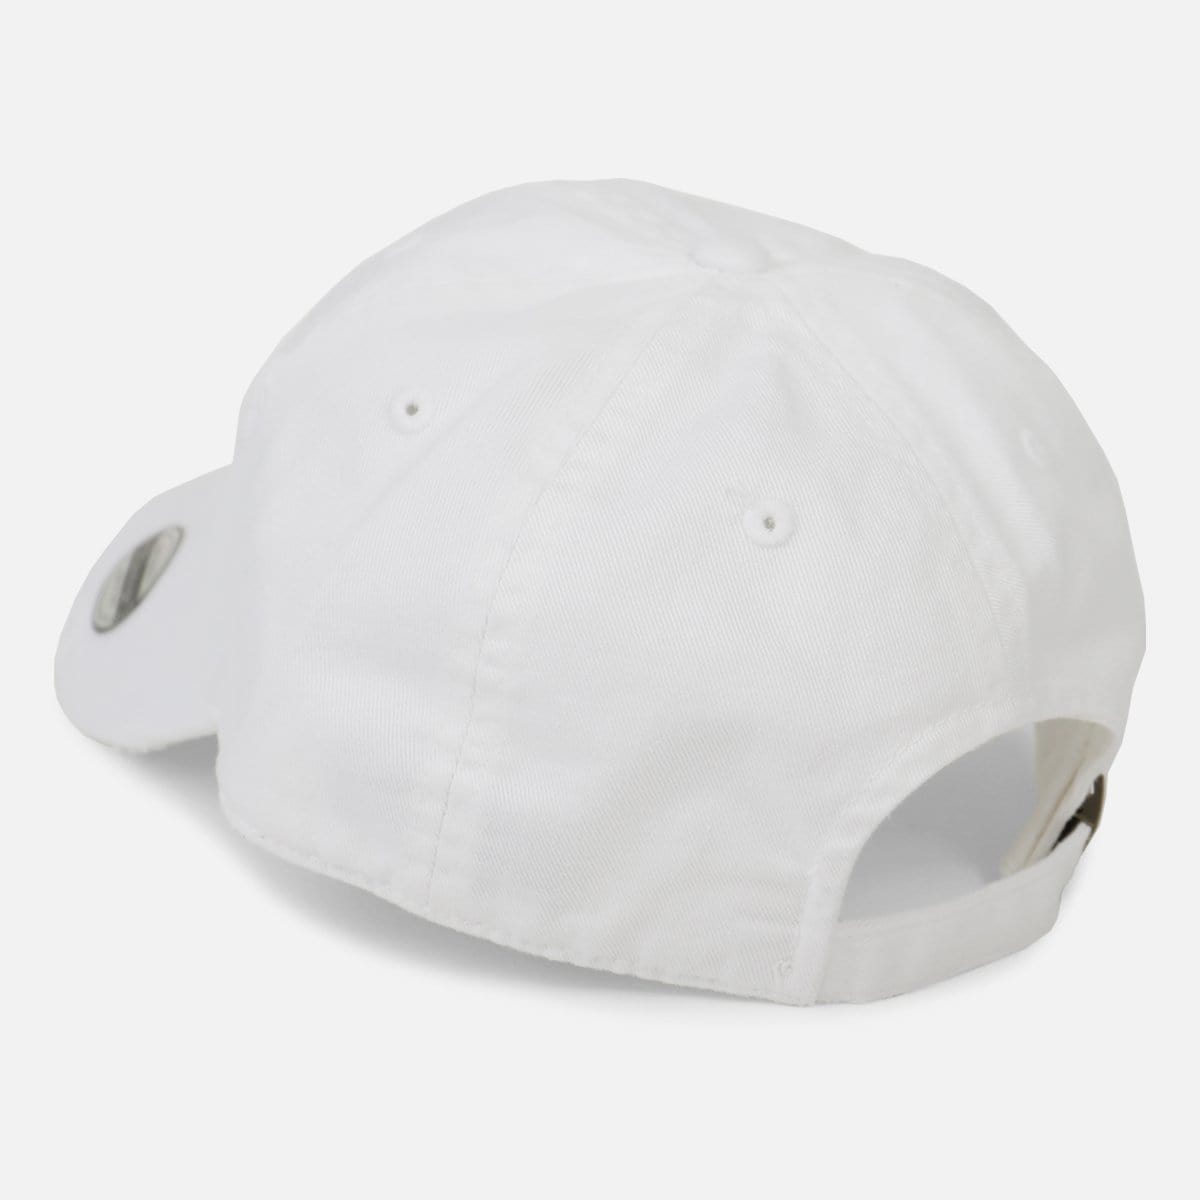 RUVilla.com is where to buy the K&B Trading Corp Vintage Dad Hat (White)!